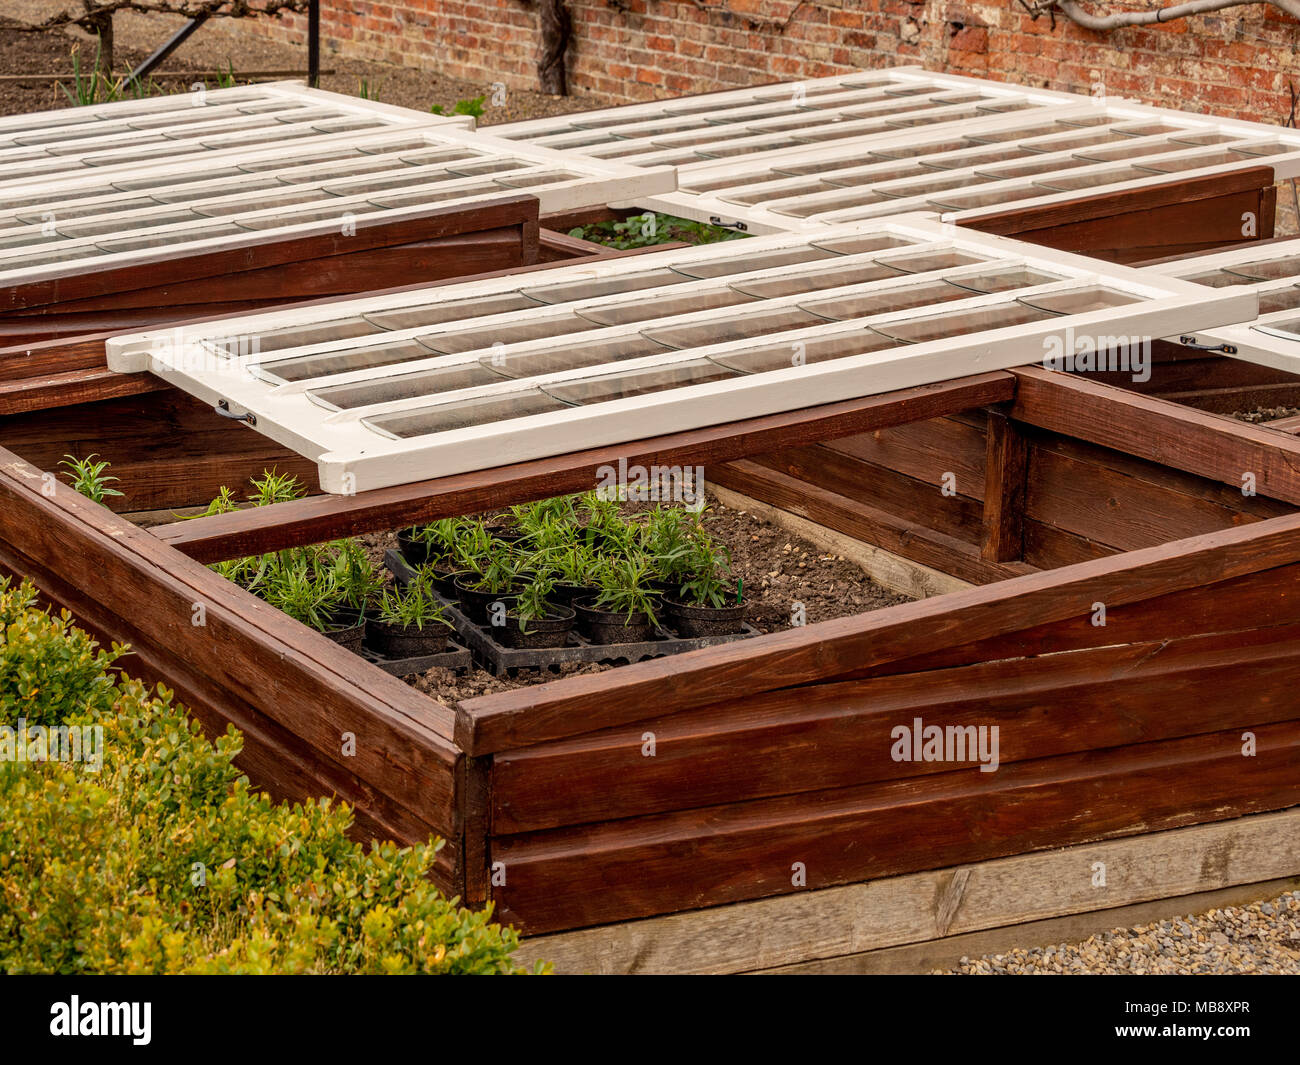 Wooden traditional style cold frame to protect tender plants from frost Stock Photo